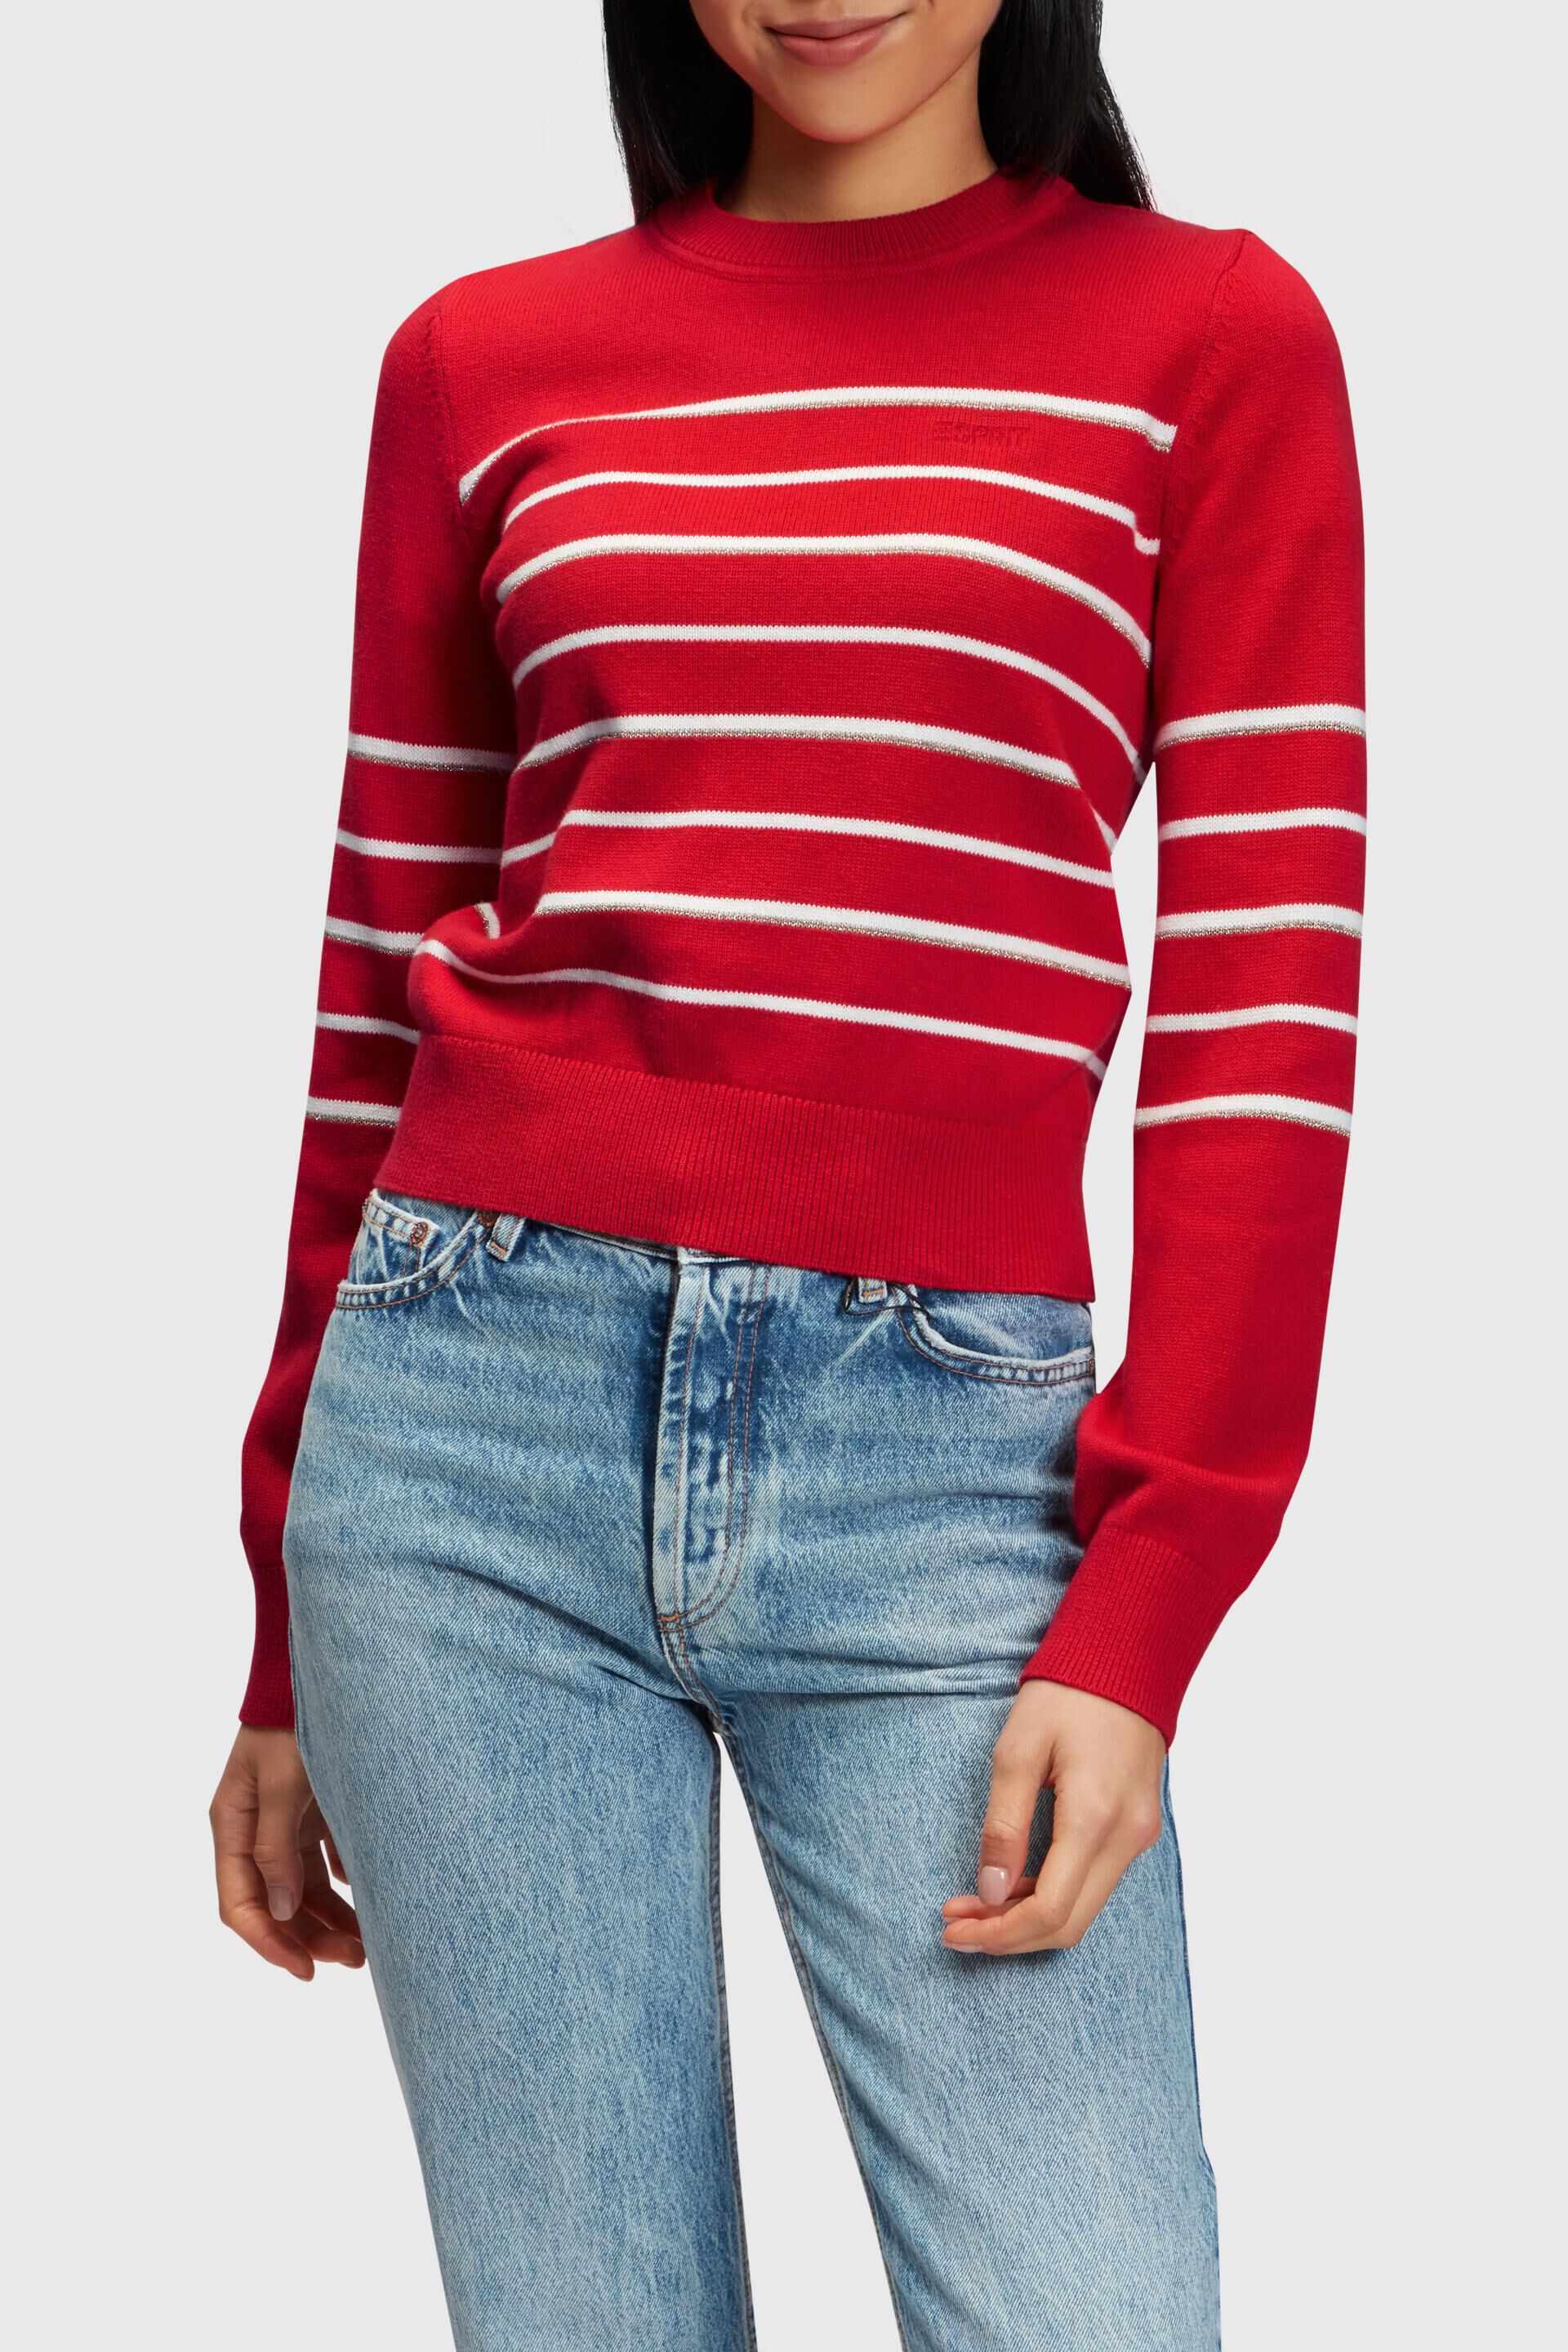 Esprit Striped jumper knitted with cashmere